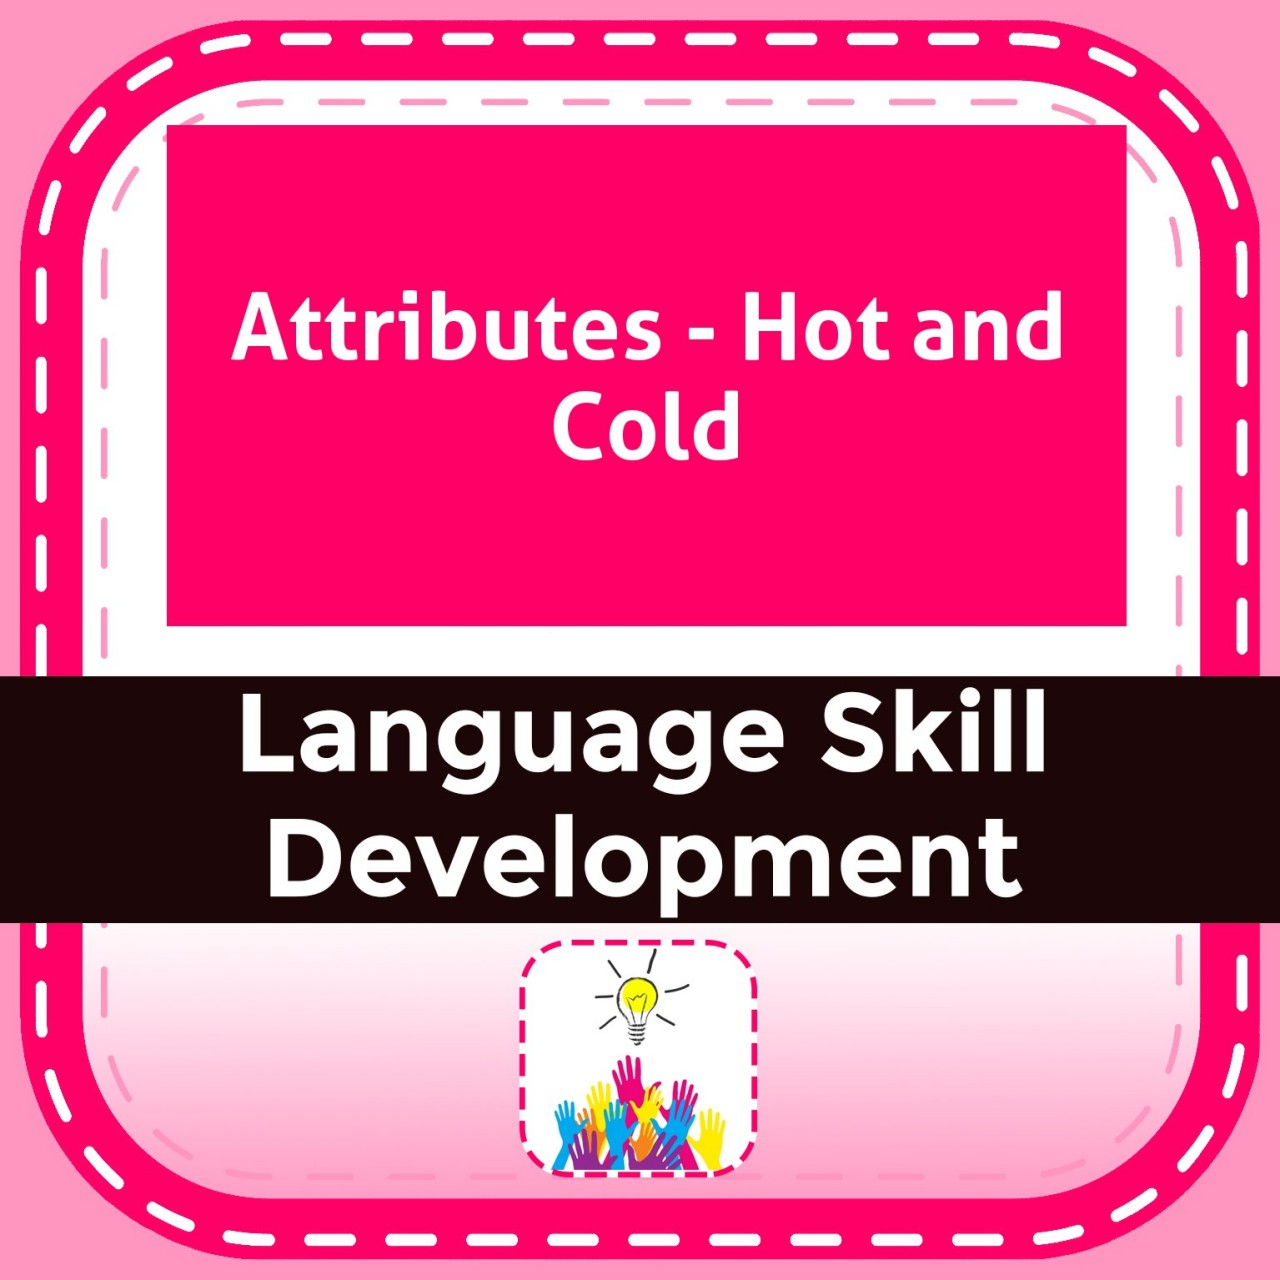 Attributes - Hot and Cold